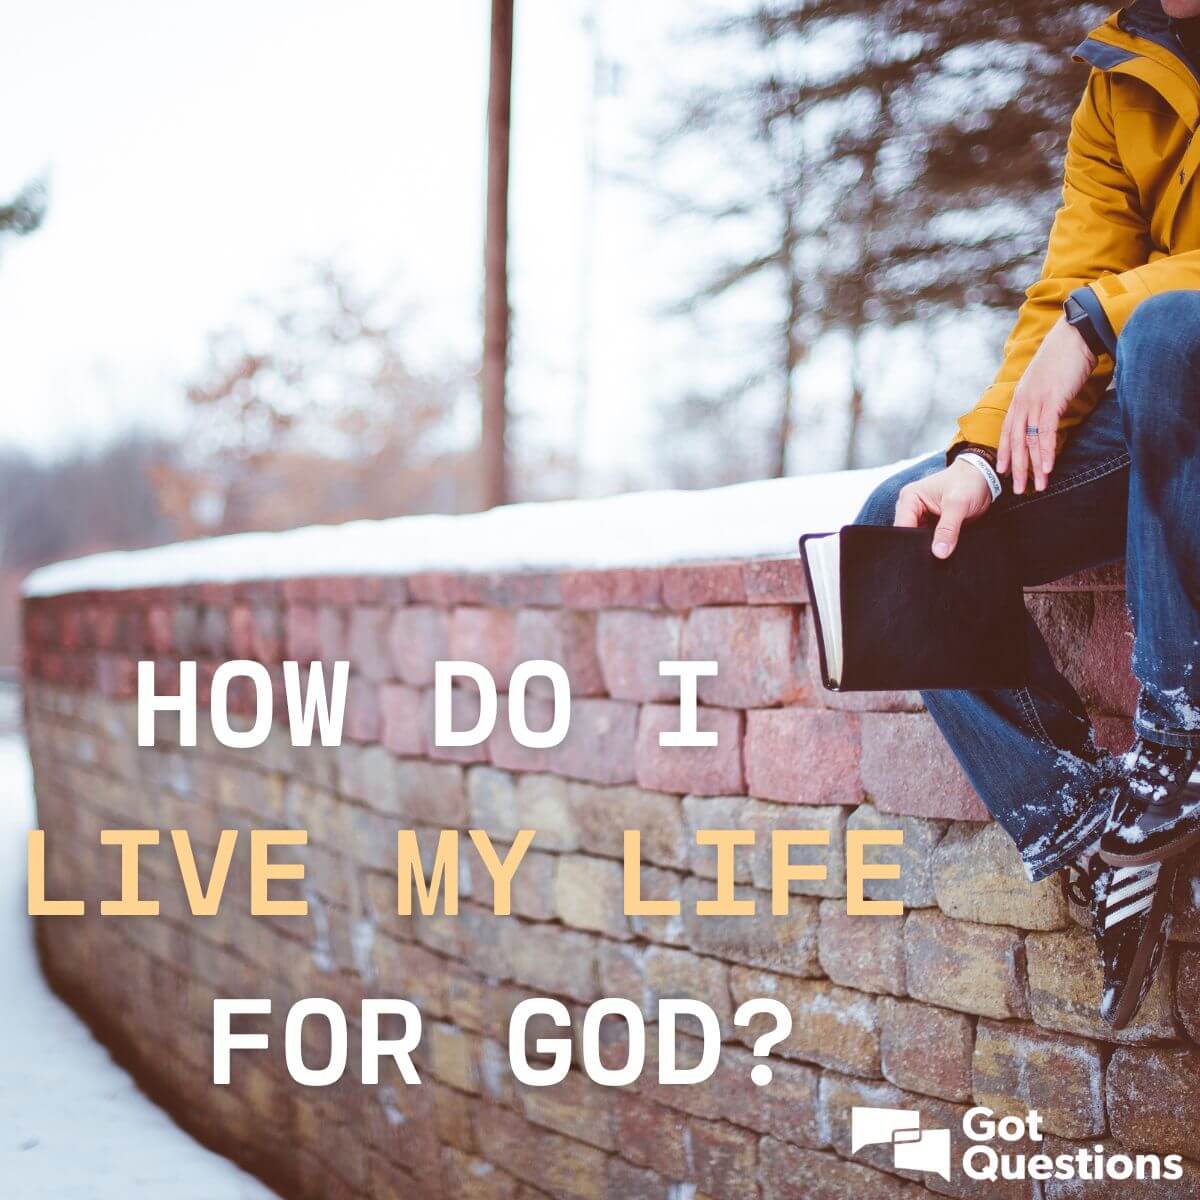 What Everybody Ought To Know About How To Live With God - Commandbid31